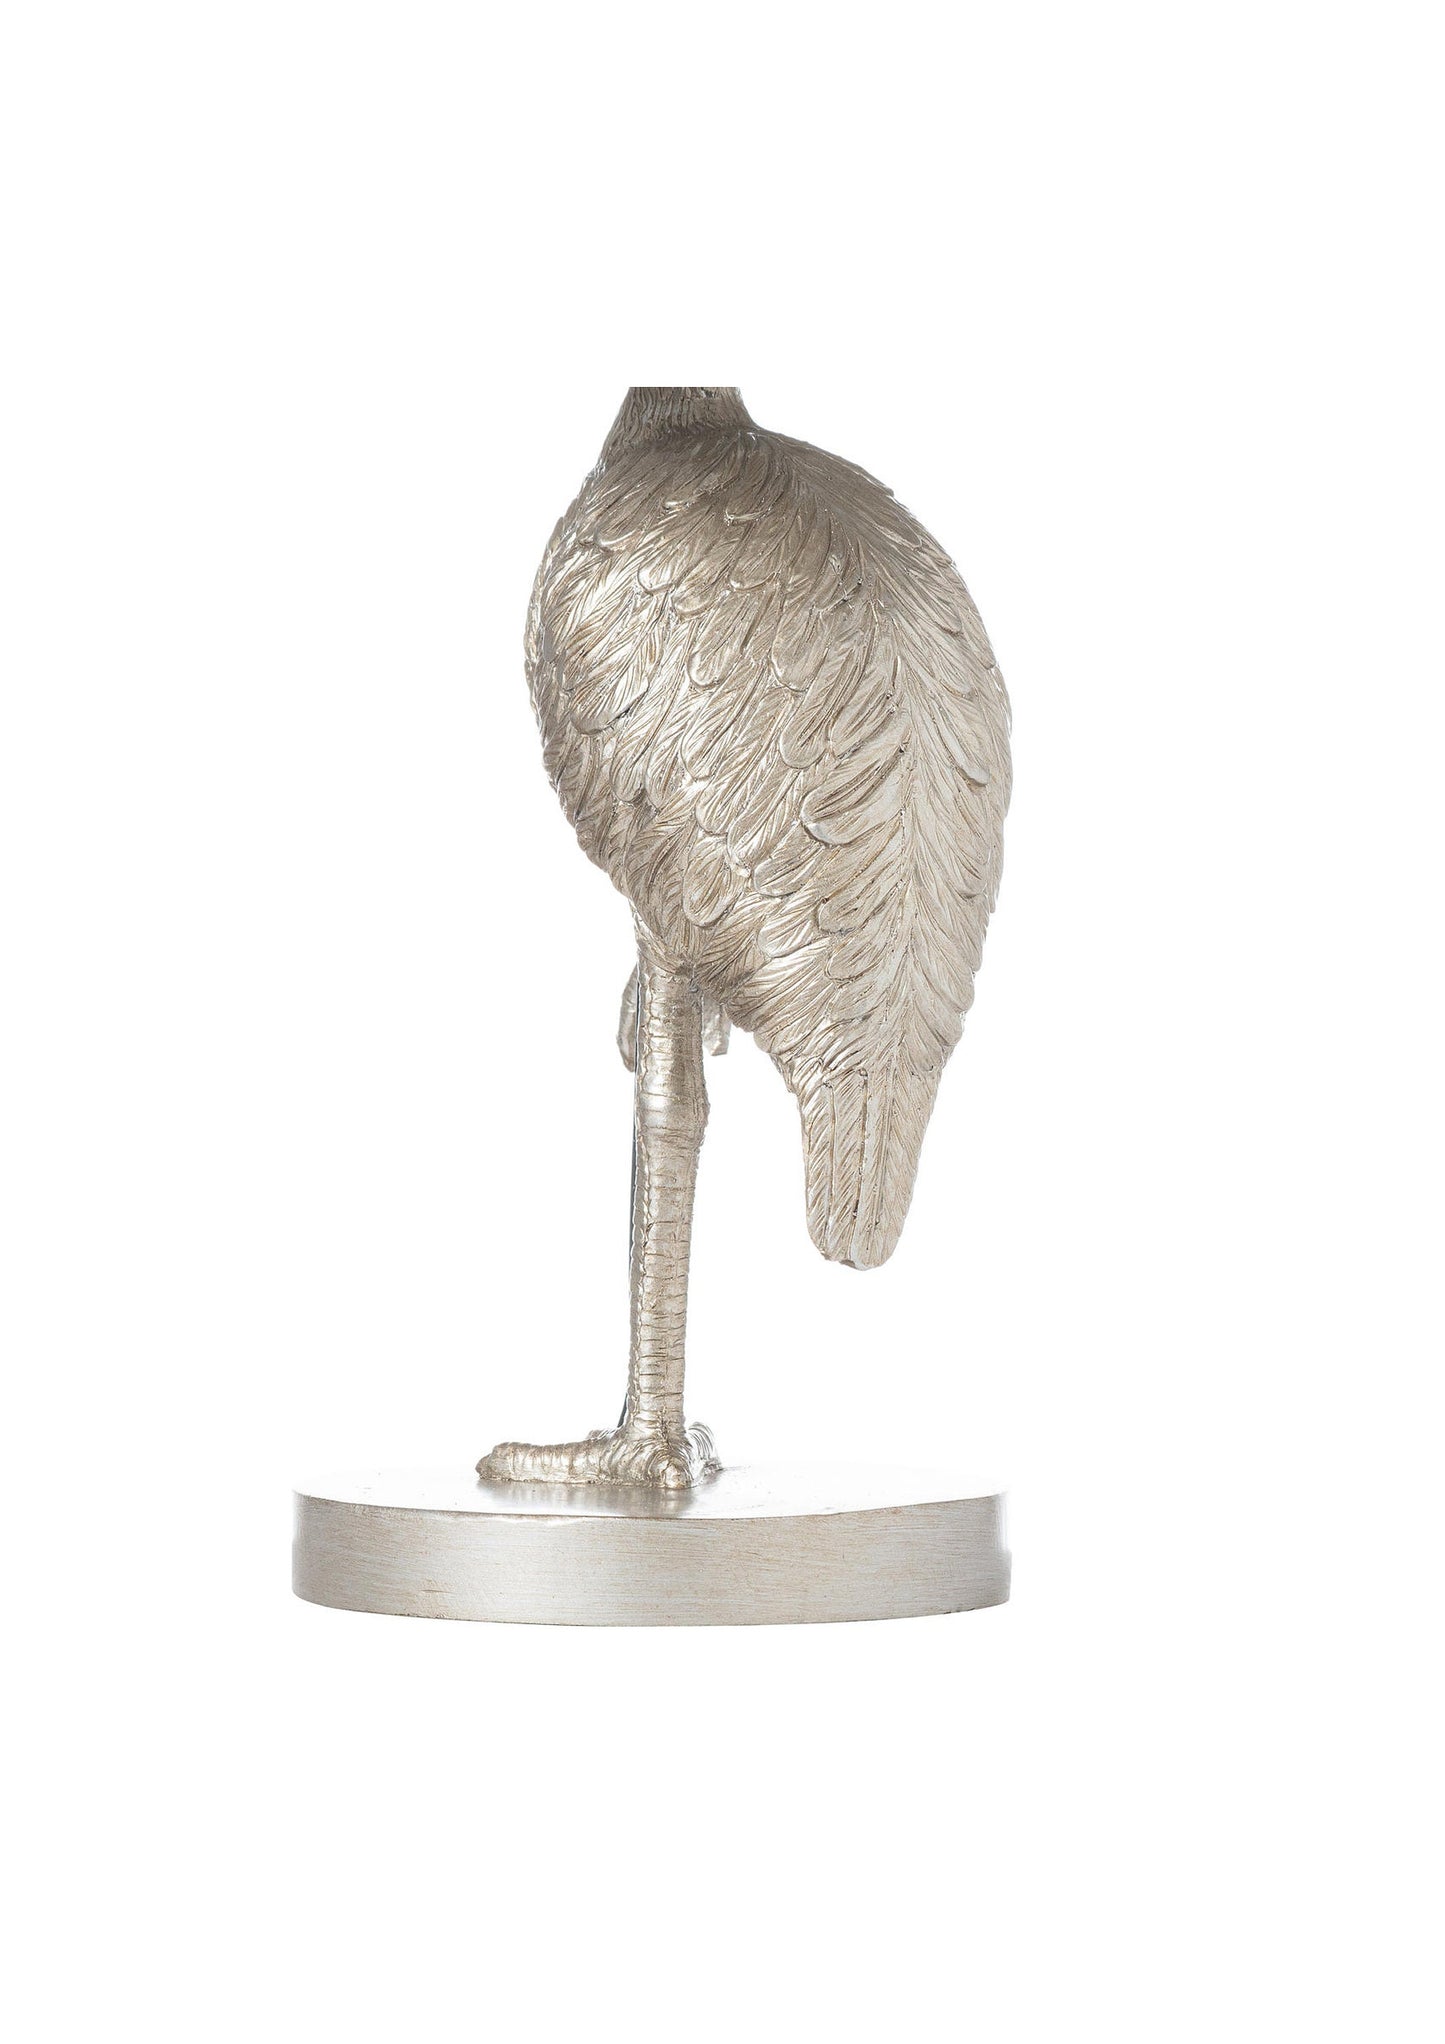 Quirky Animal Flamingo Silver Table Lamp With Grey Shade